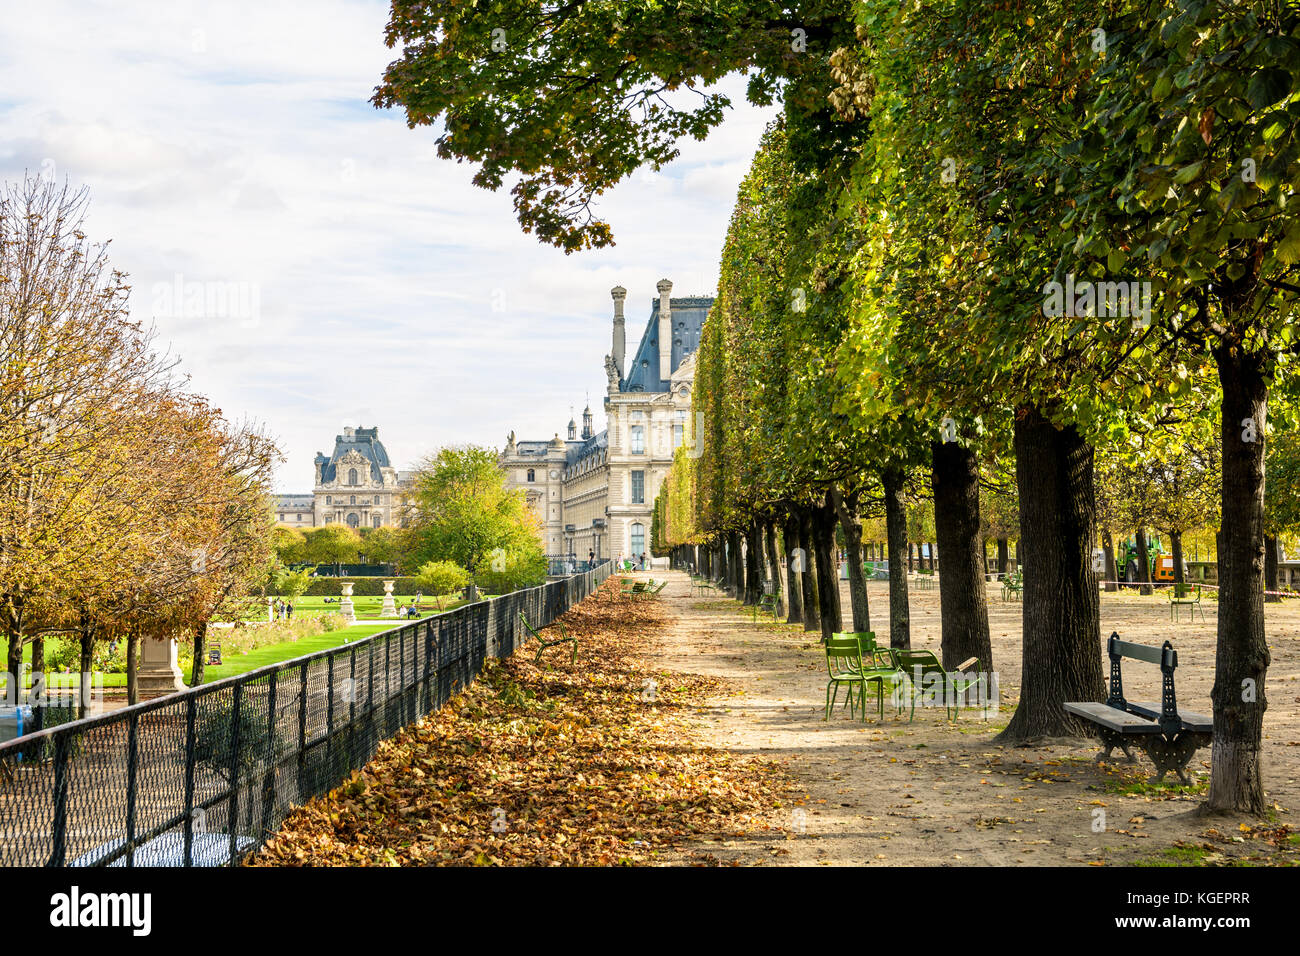 The Flore pavilion of the Louvre palace seen from the Tuileries garden in Paris, by a sunny autumn afternoon, with an alignment of linden trees, metal Stock Photo